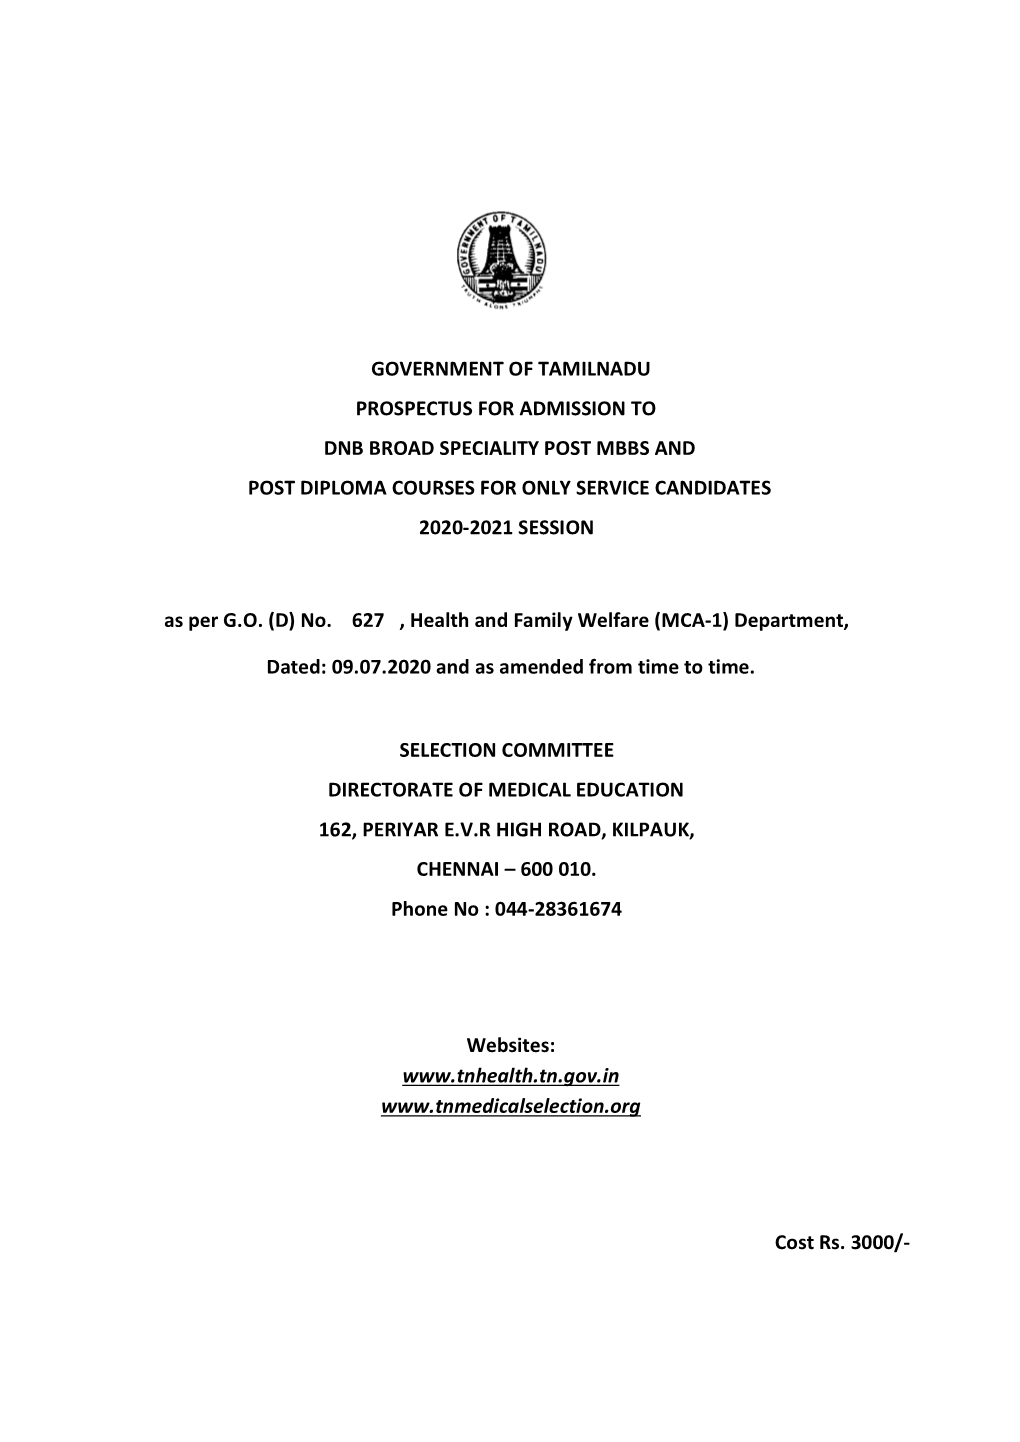 Government of Tamilnadu Prospectus for Admission to Dnb Broad Speciality Post Mbbs and Post Diploma Courses for Only Service Candidates 2020-2021 Session